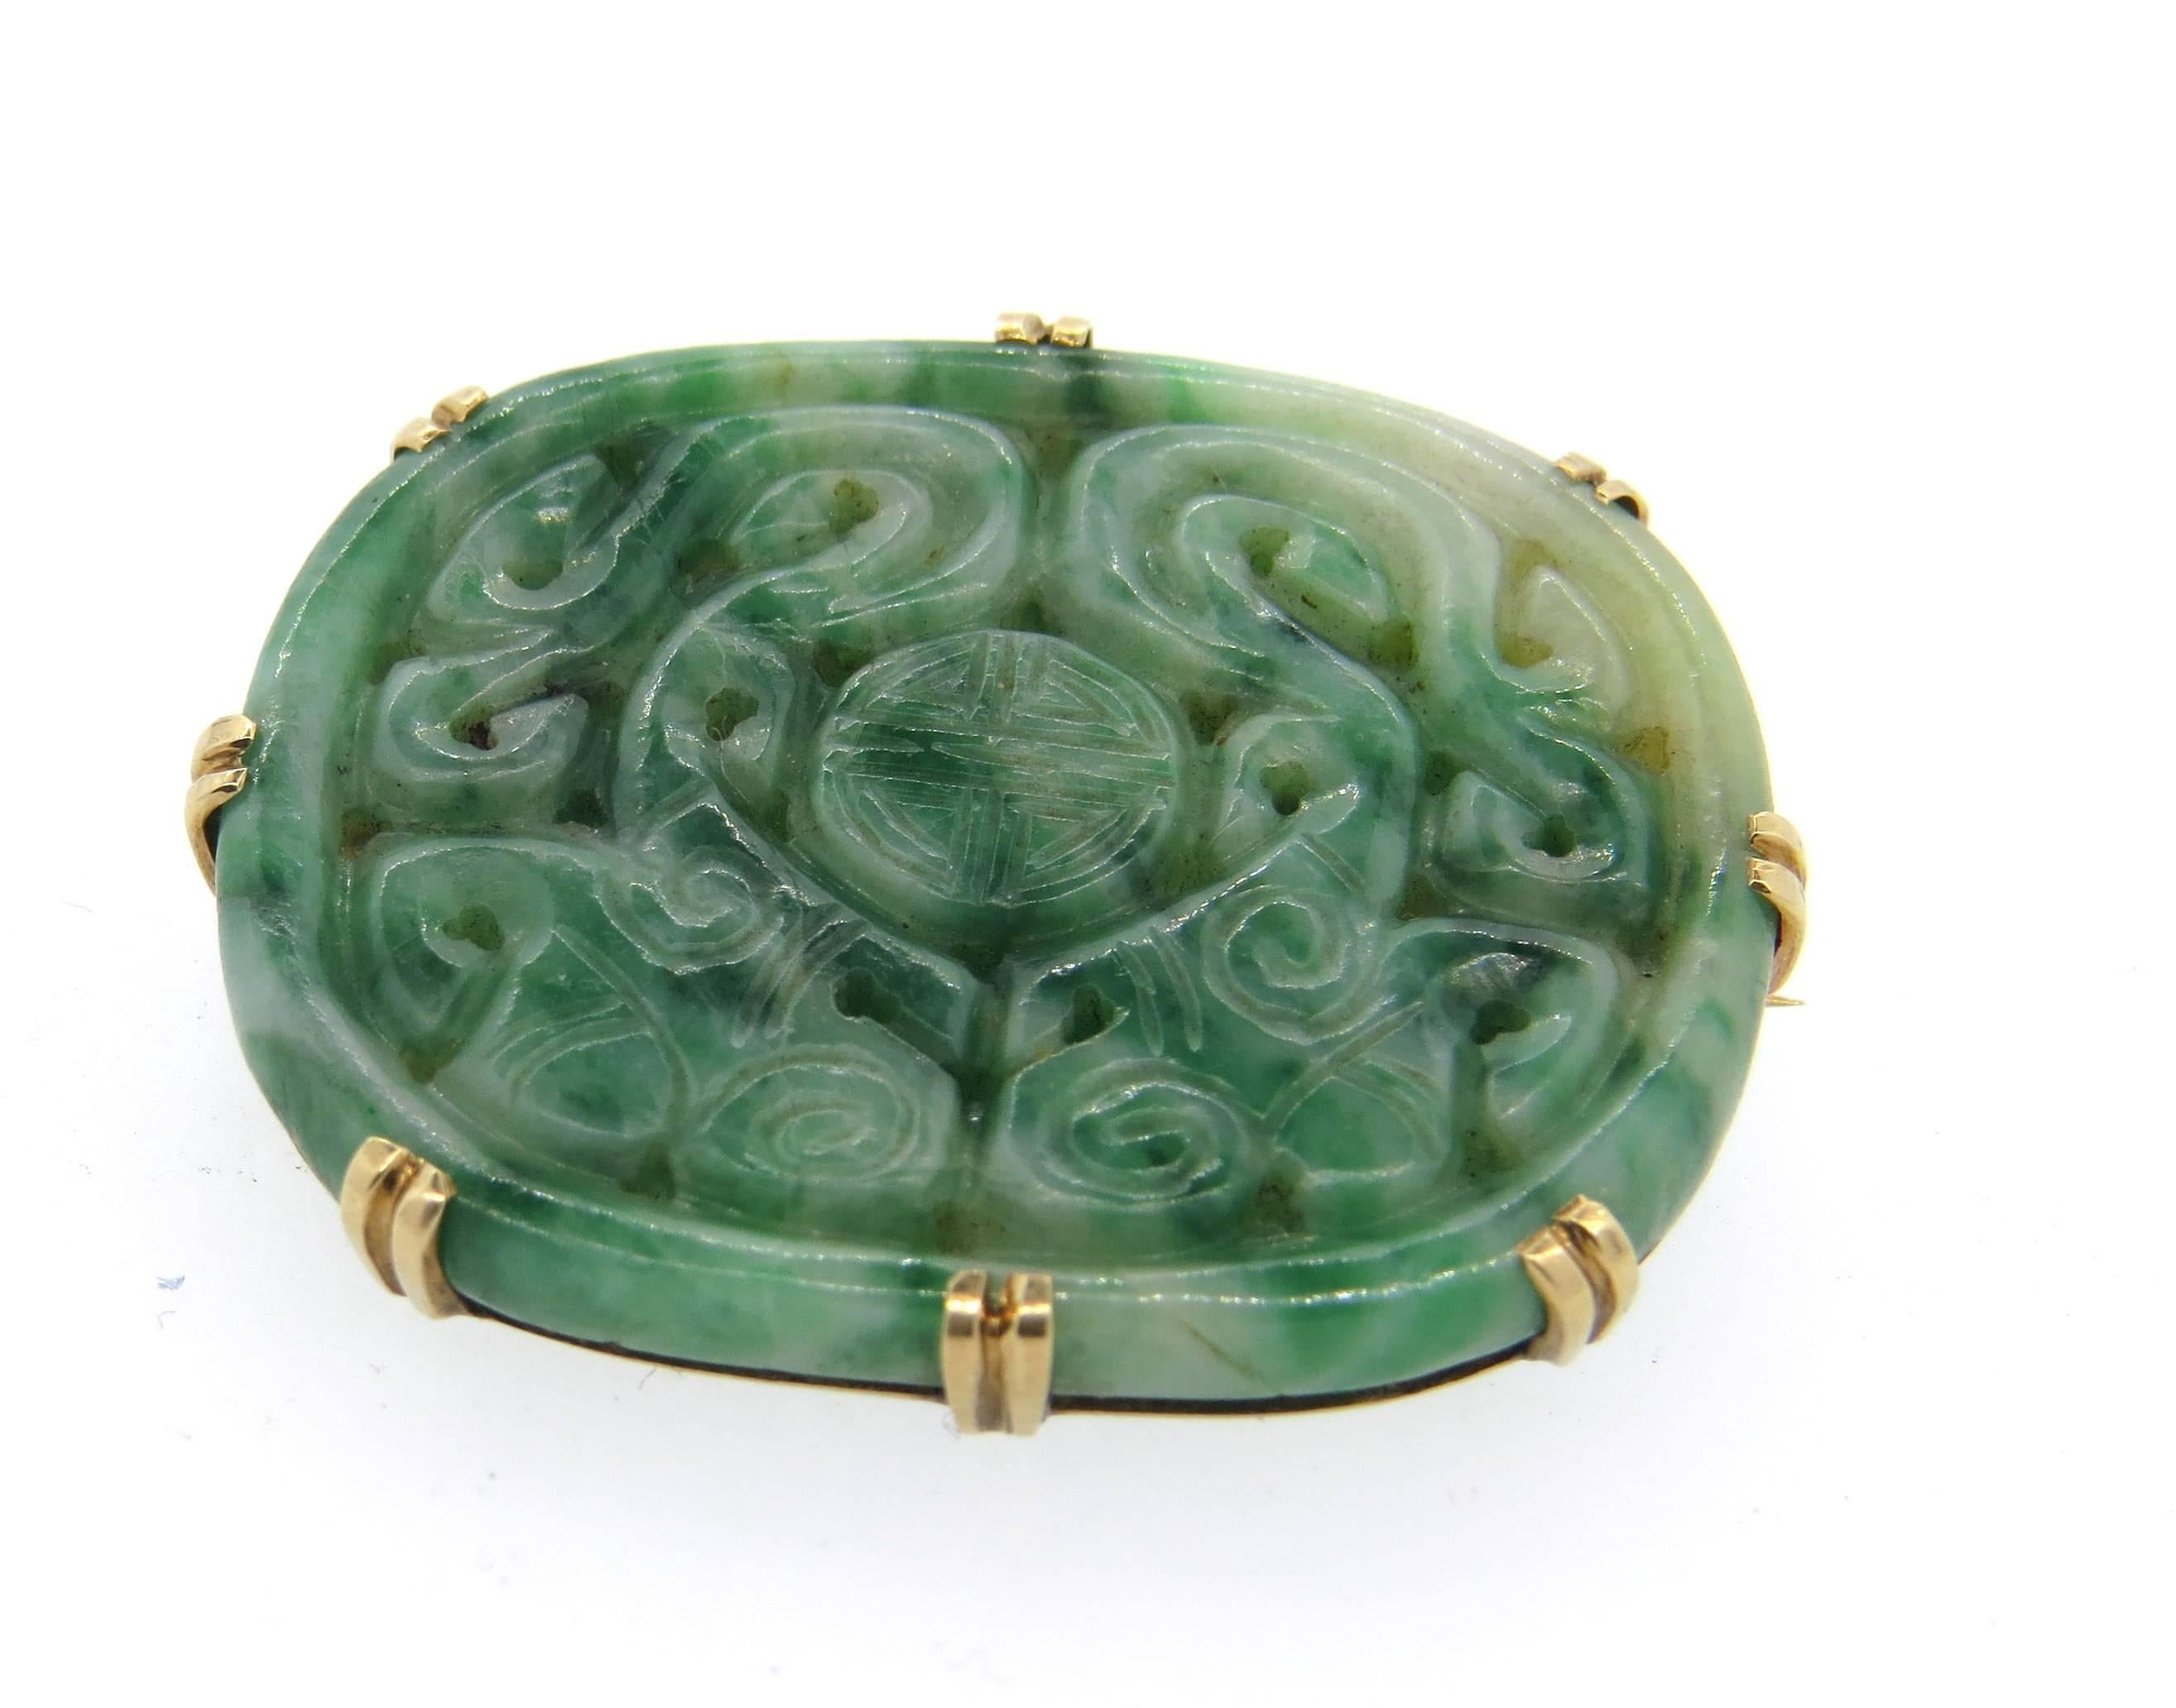 Antique 14k gold brooch, featuring carved jade top. Brooch measures 36mm x 29mm. Weight of the piece - 10 grams 